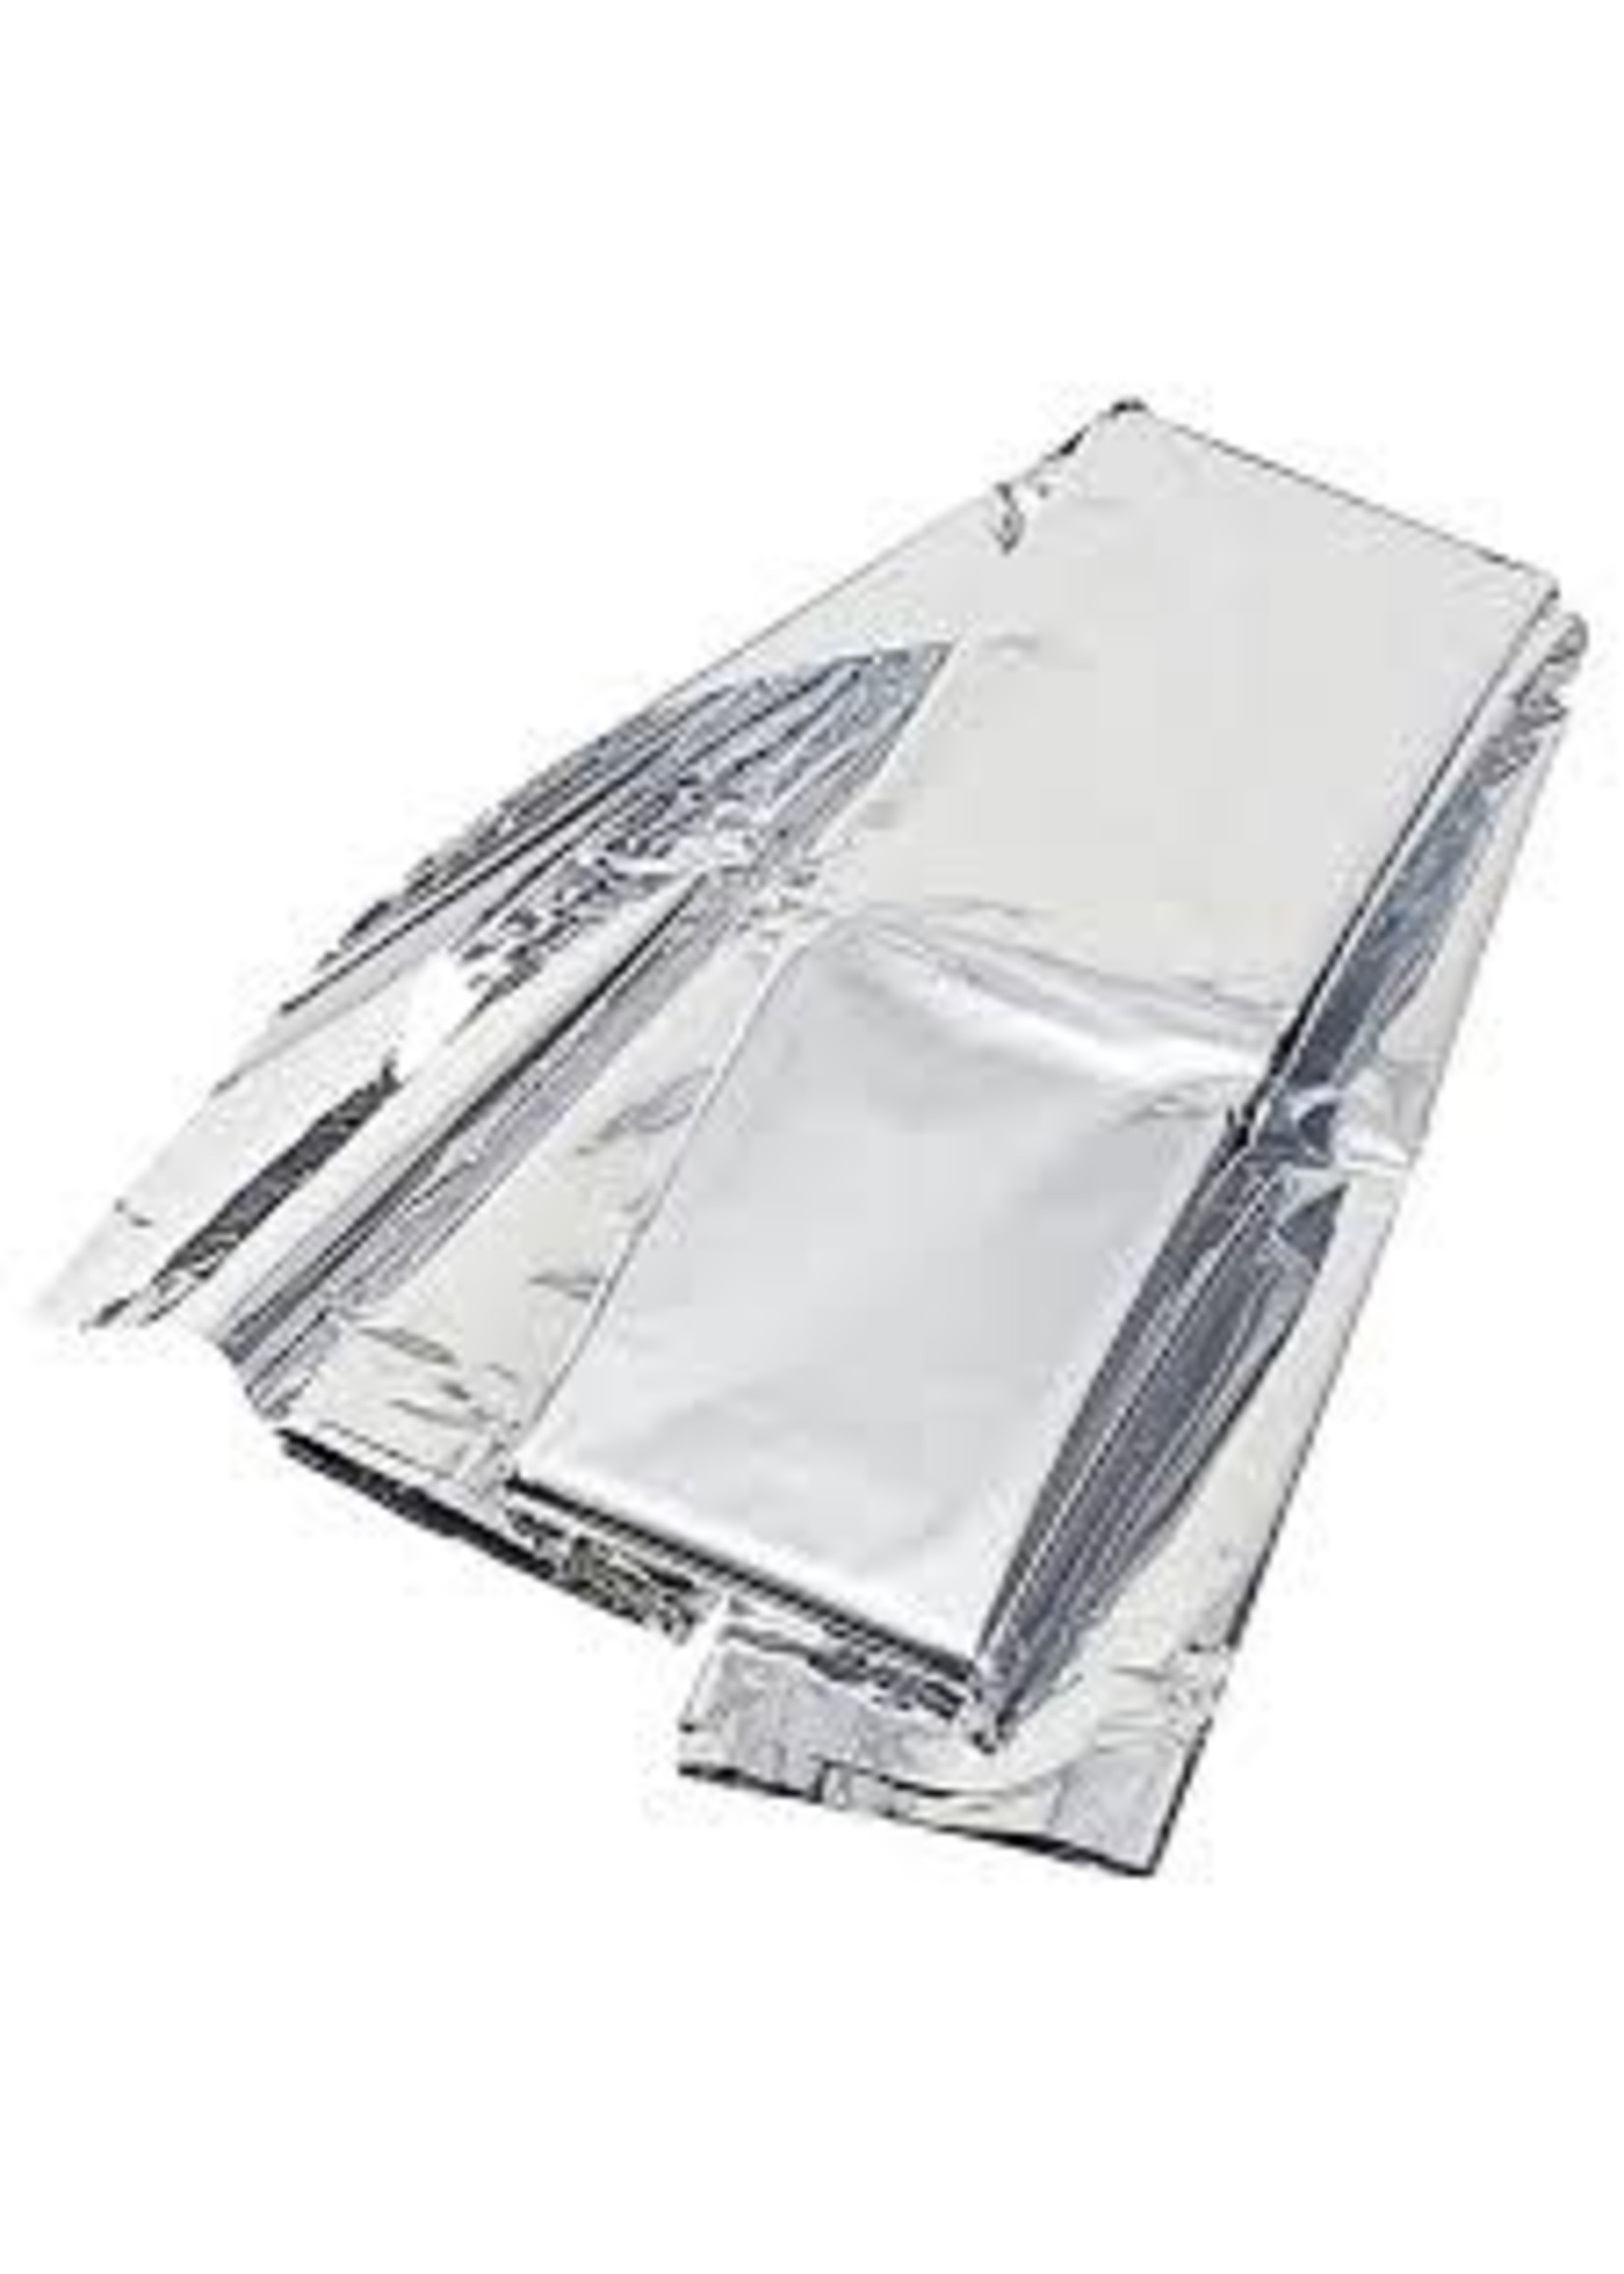 BELL OUTDOOR PRODUCTS BELL EMERGENCY BLANKET 4624